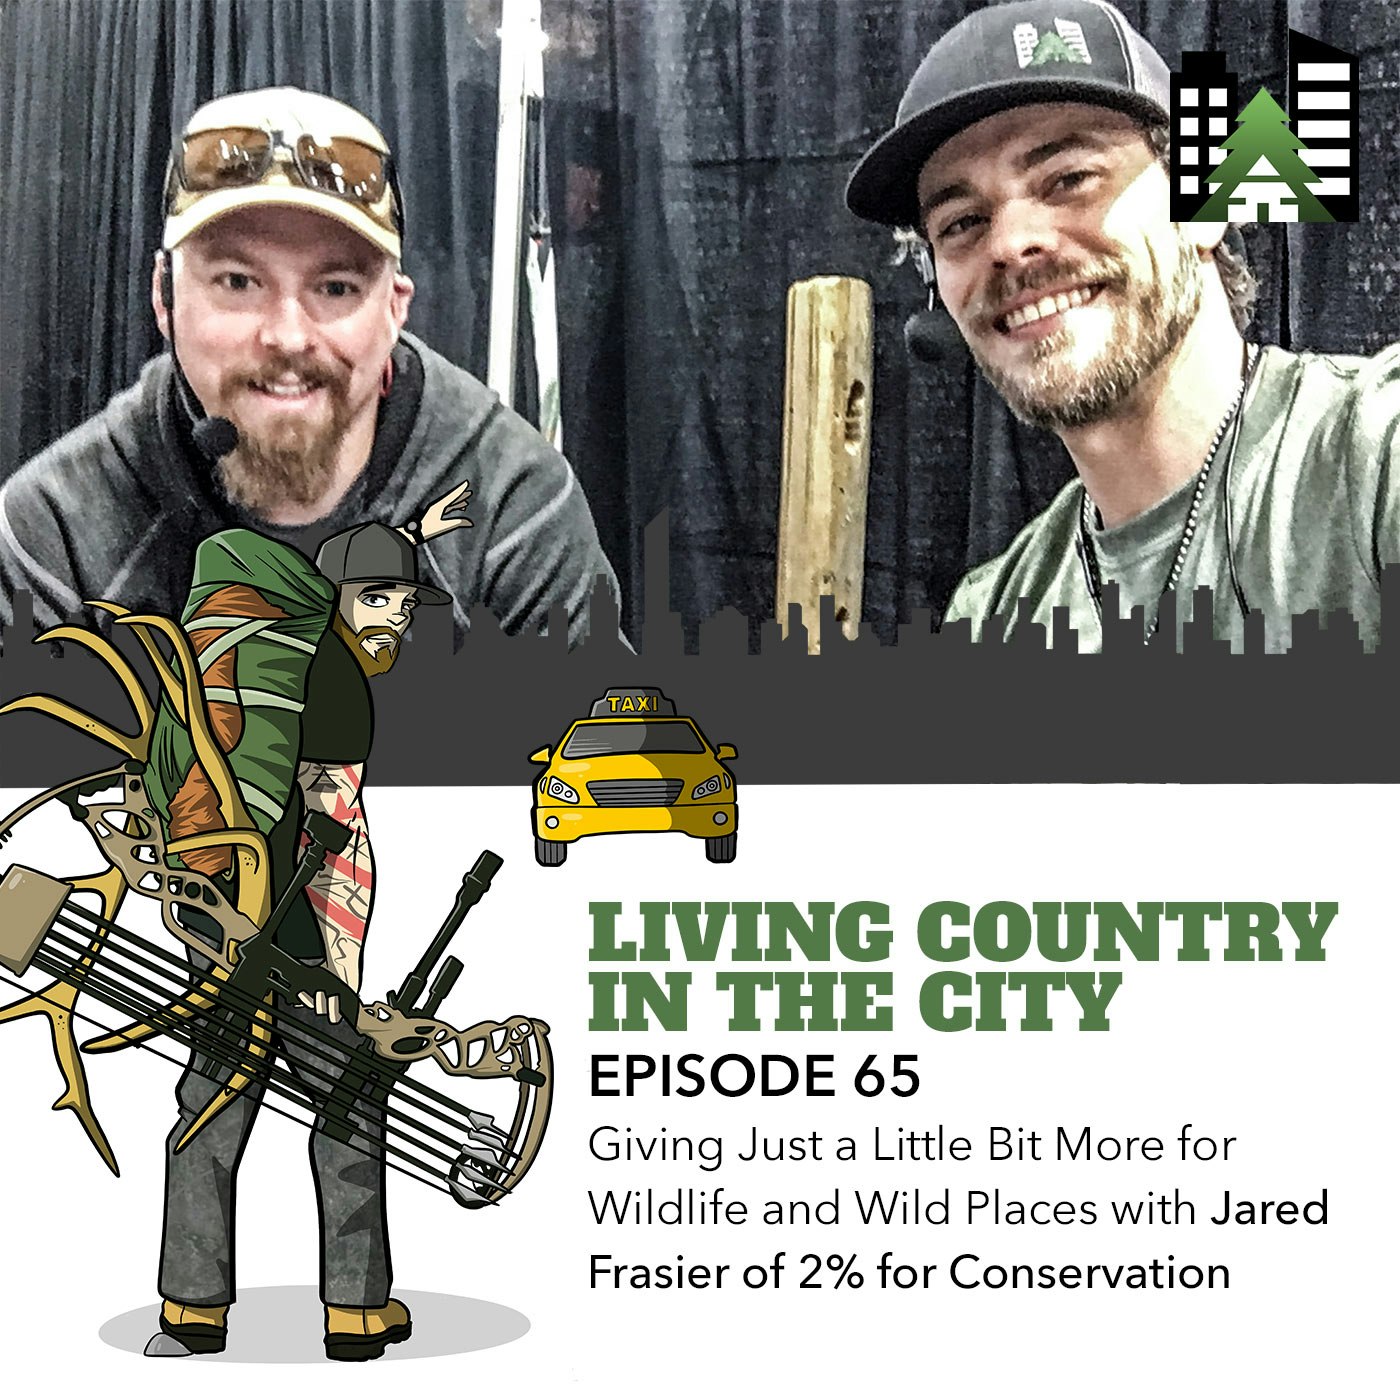 Ep 65 - Giving Just a Little Bit More for Wildlife and Wild Places with Jared Frasier of 2% for Conservation